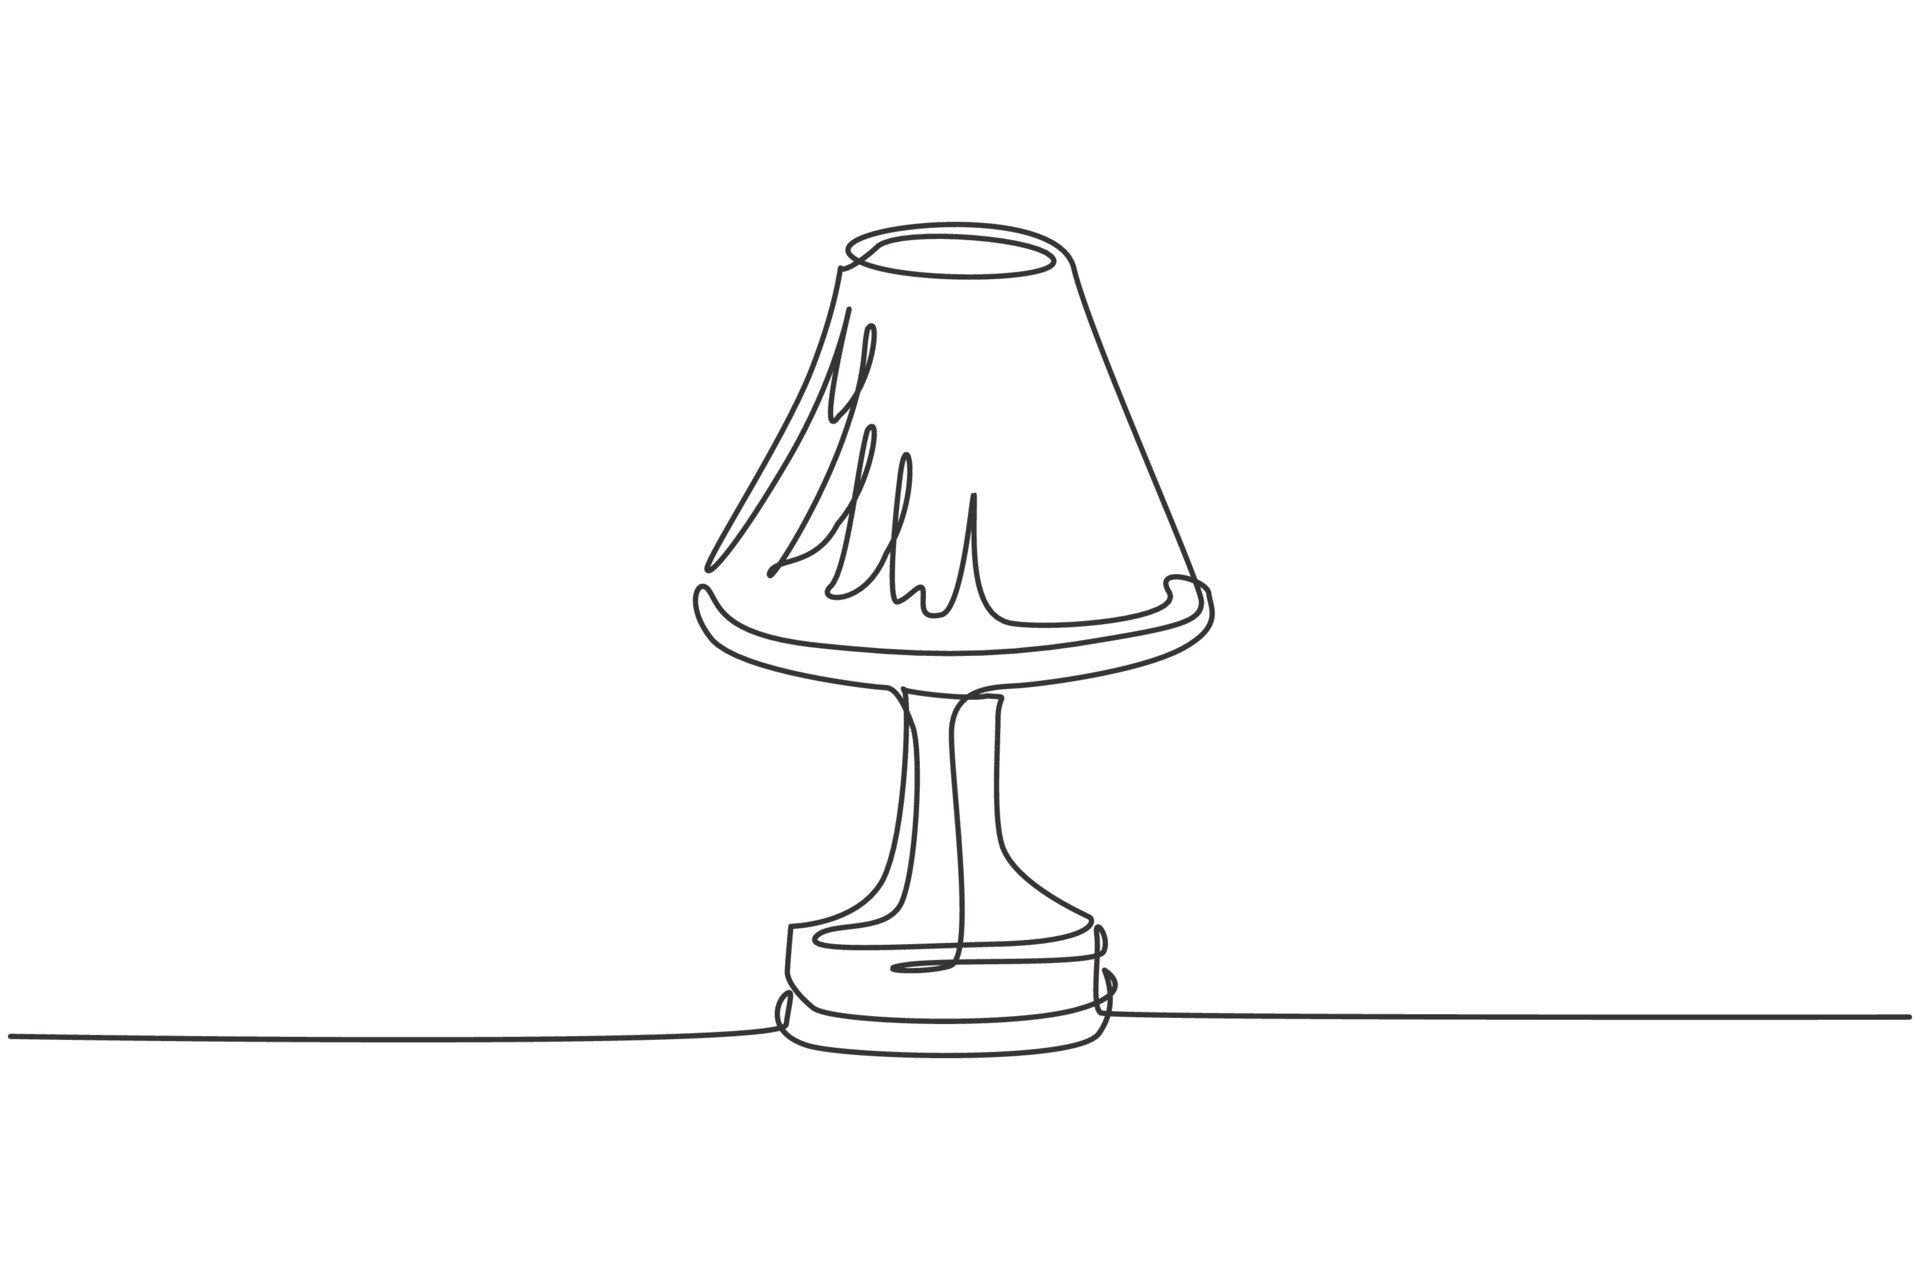 Draw Graphic Vector Ilration, How To Draw Table Lamp With Design